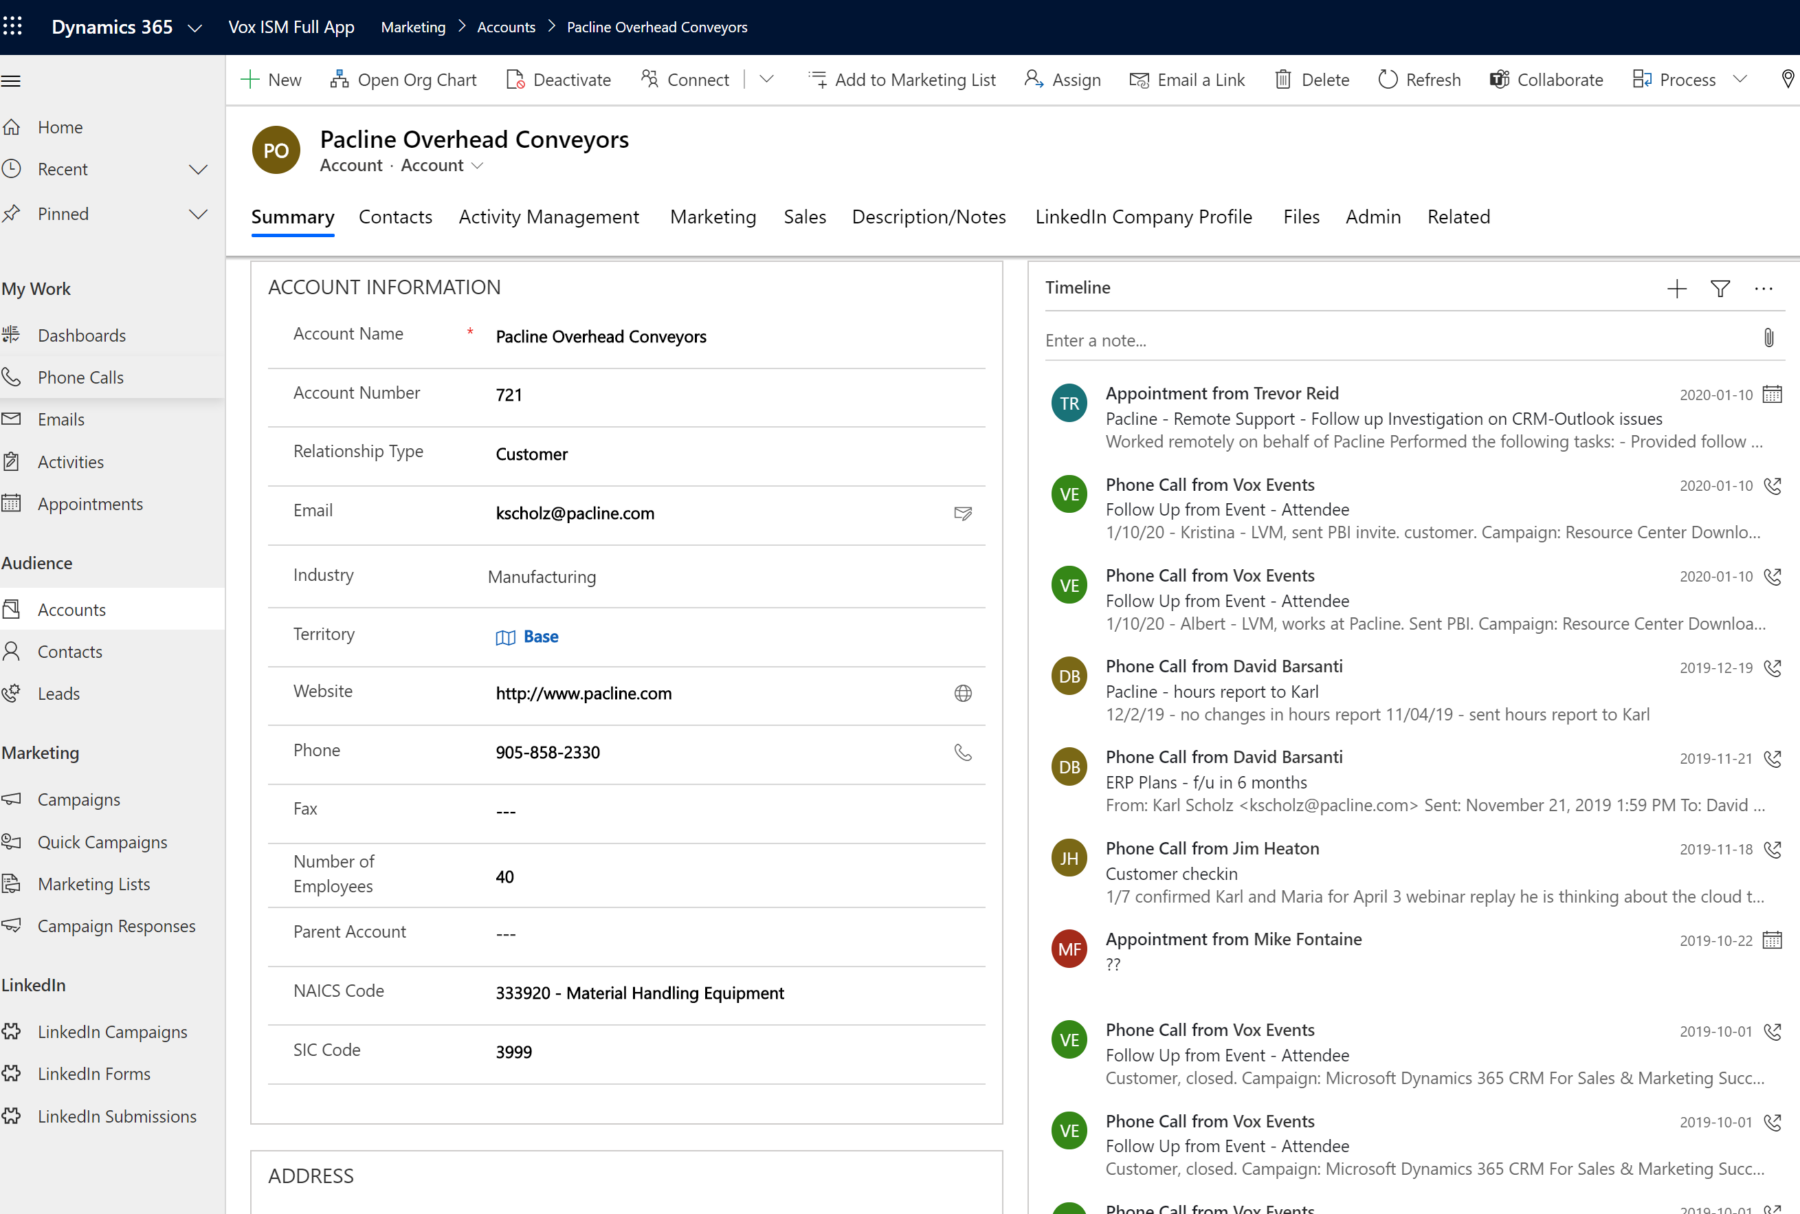 Transitioning to Unified Interface in Dynamics 365_3